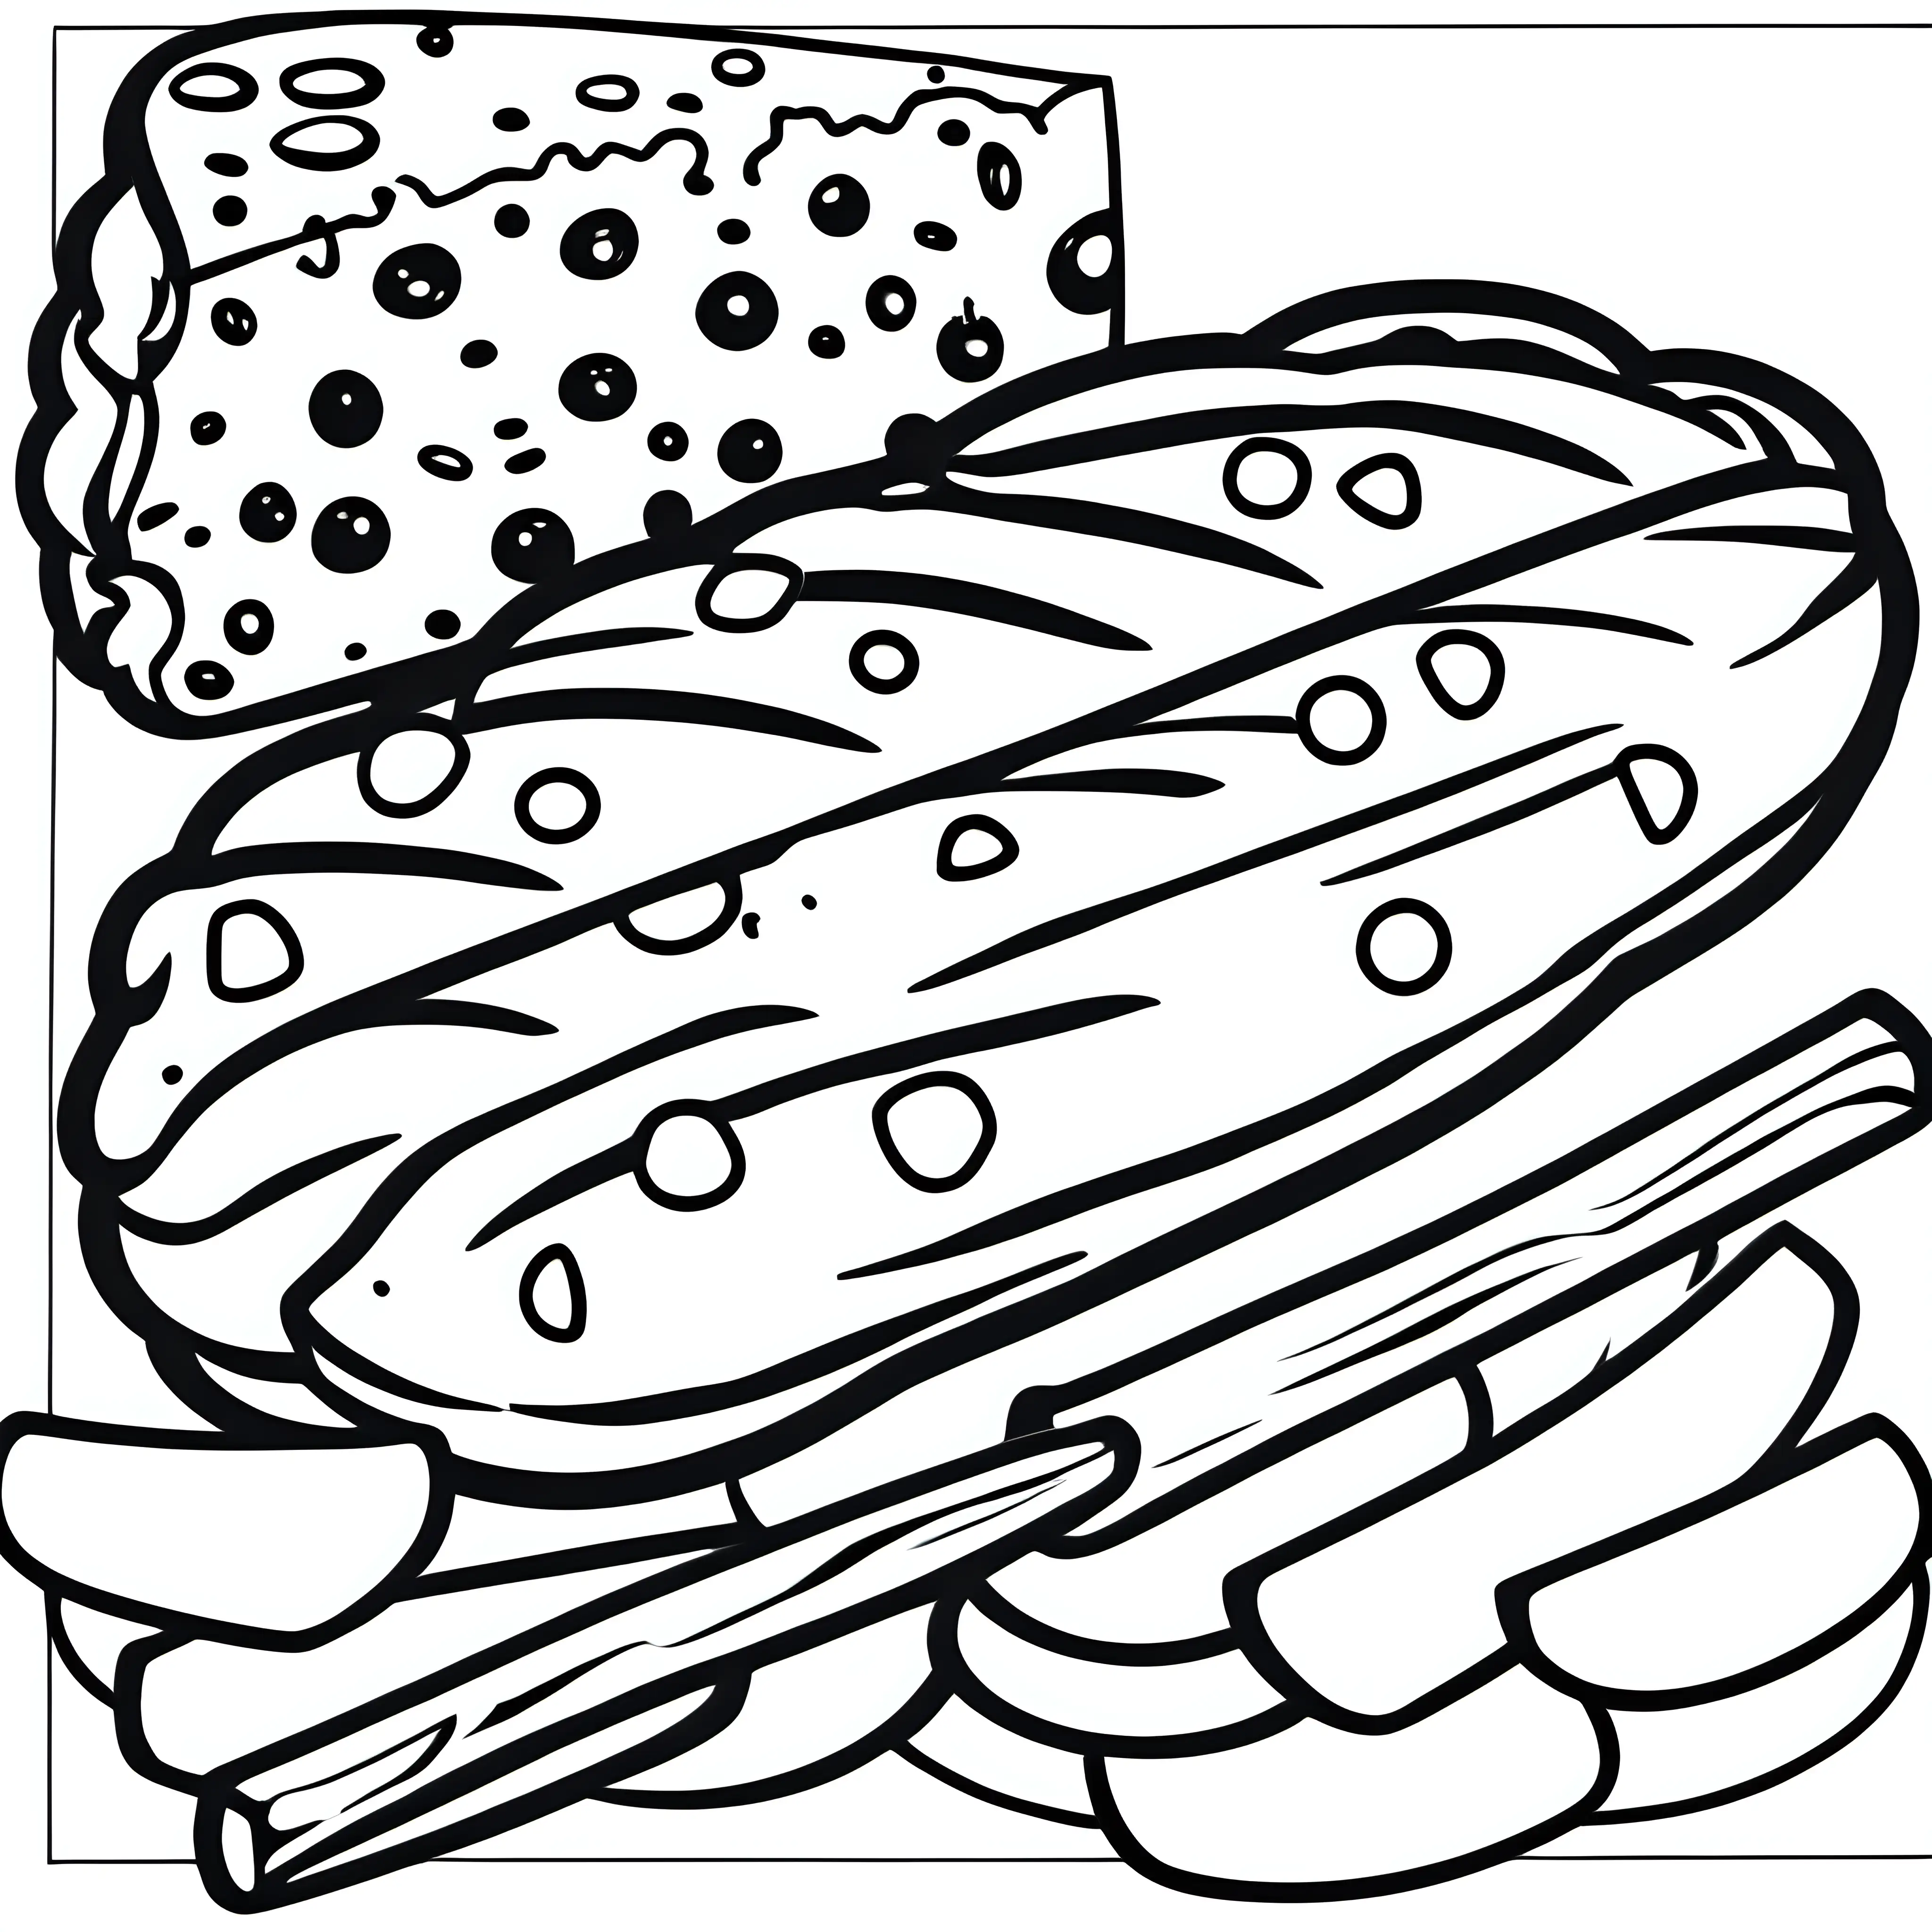 French baguette and cheese coloring page for relaxation and creativity muse